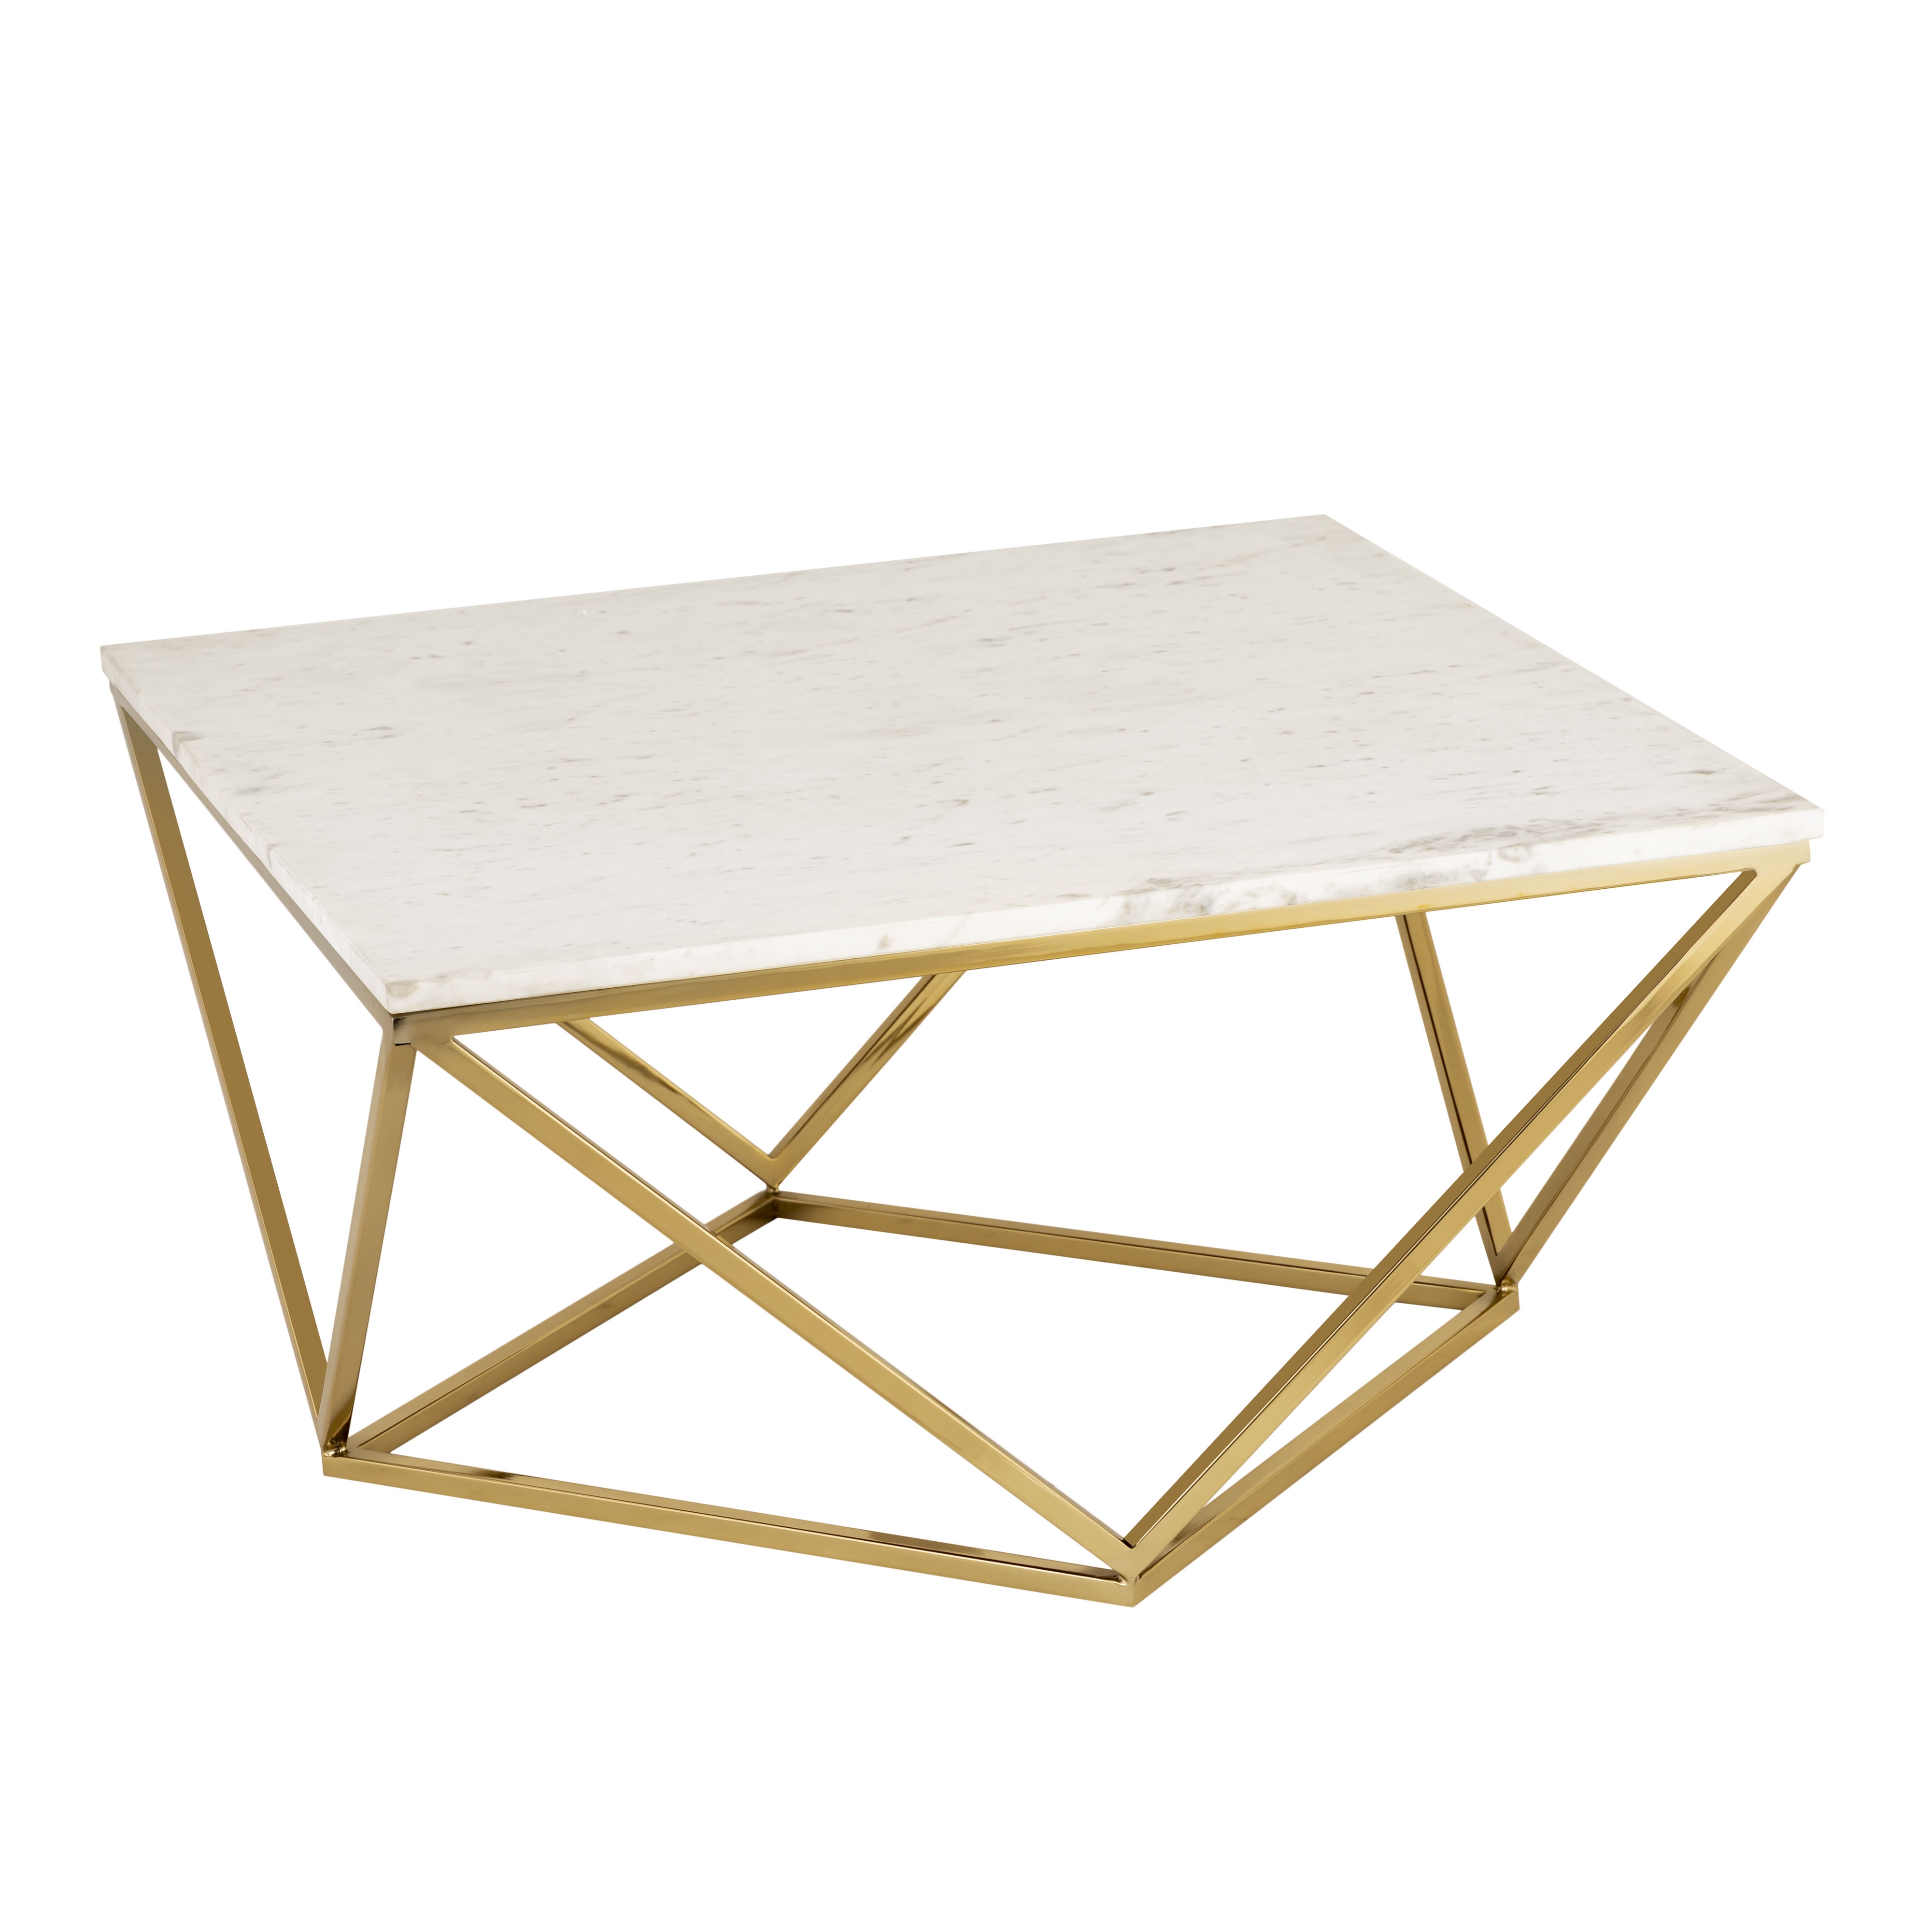 Rebecca White Marble Coffee Table - Image 2